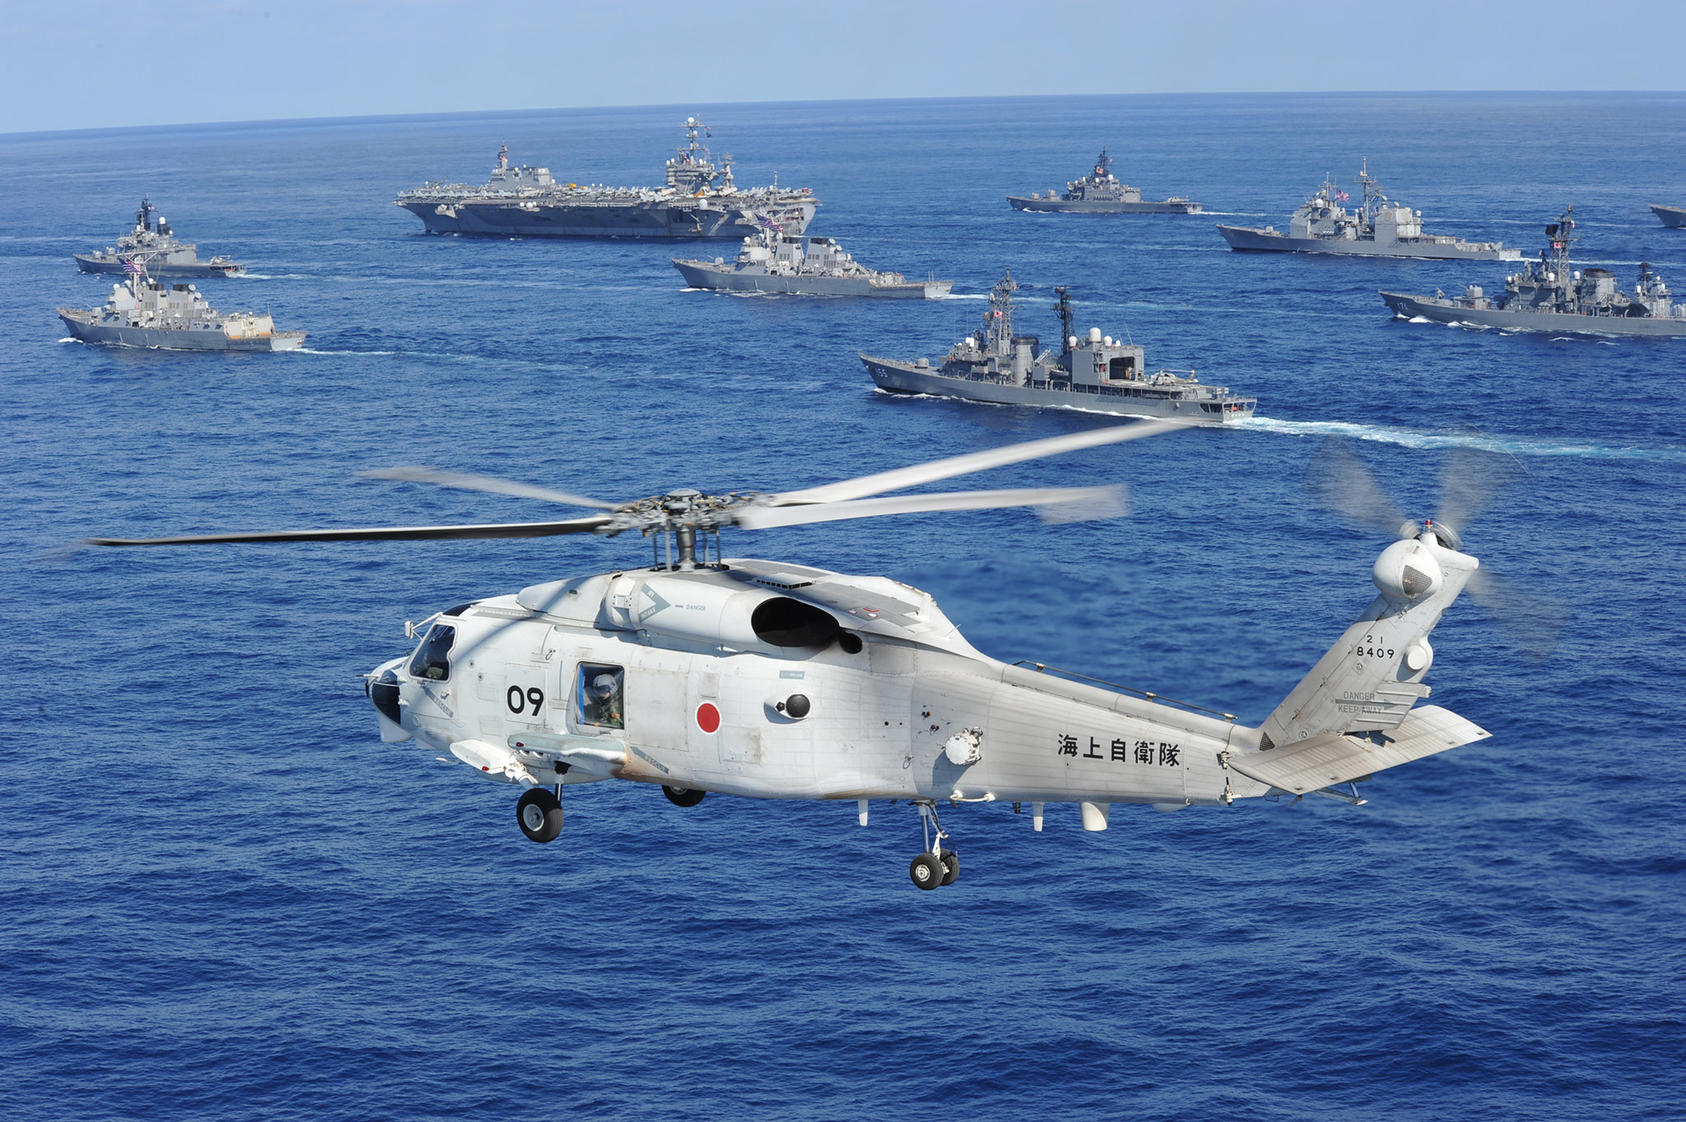 A Japan Maritime Self-Defense Force (JMSDF) helicopter conducts flight operations in the vicinity of U.S. Navy and JMSDF vessels, Dec. 10, 2010. (Japan Maritime Self-Defense Force)